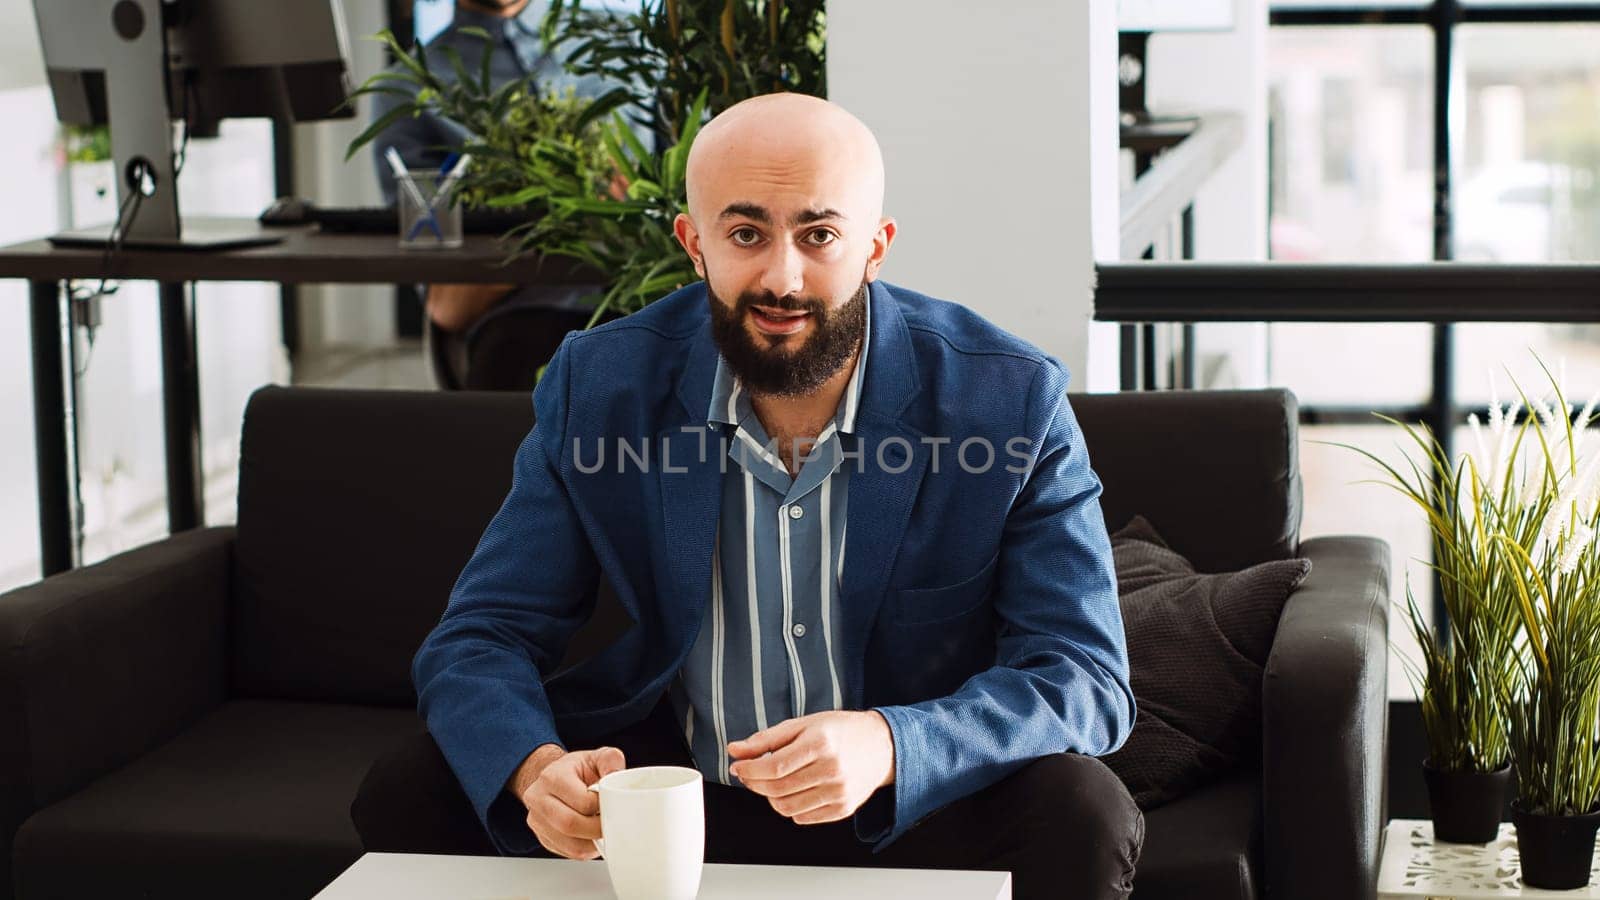 Man attends business meeting videocall to review new development strategy, using online telework call with marketing department. Startup executive manager in office coworking space. Tripod shot.